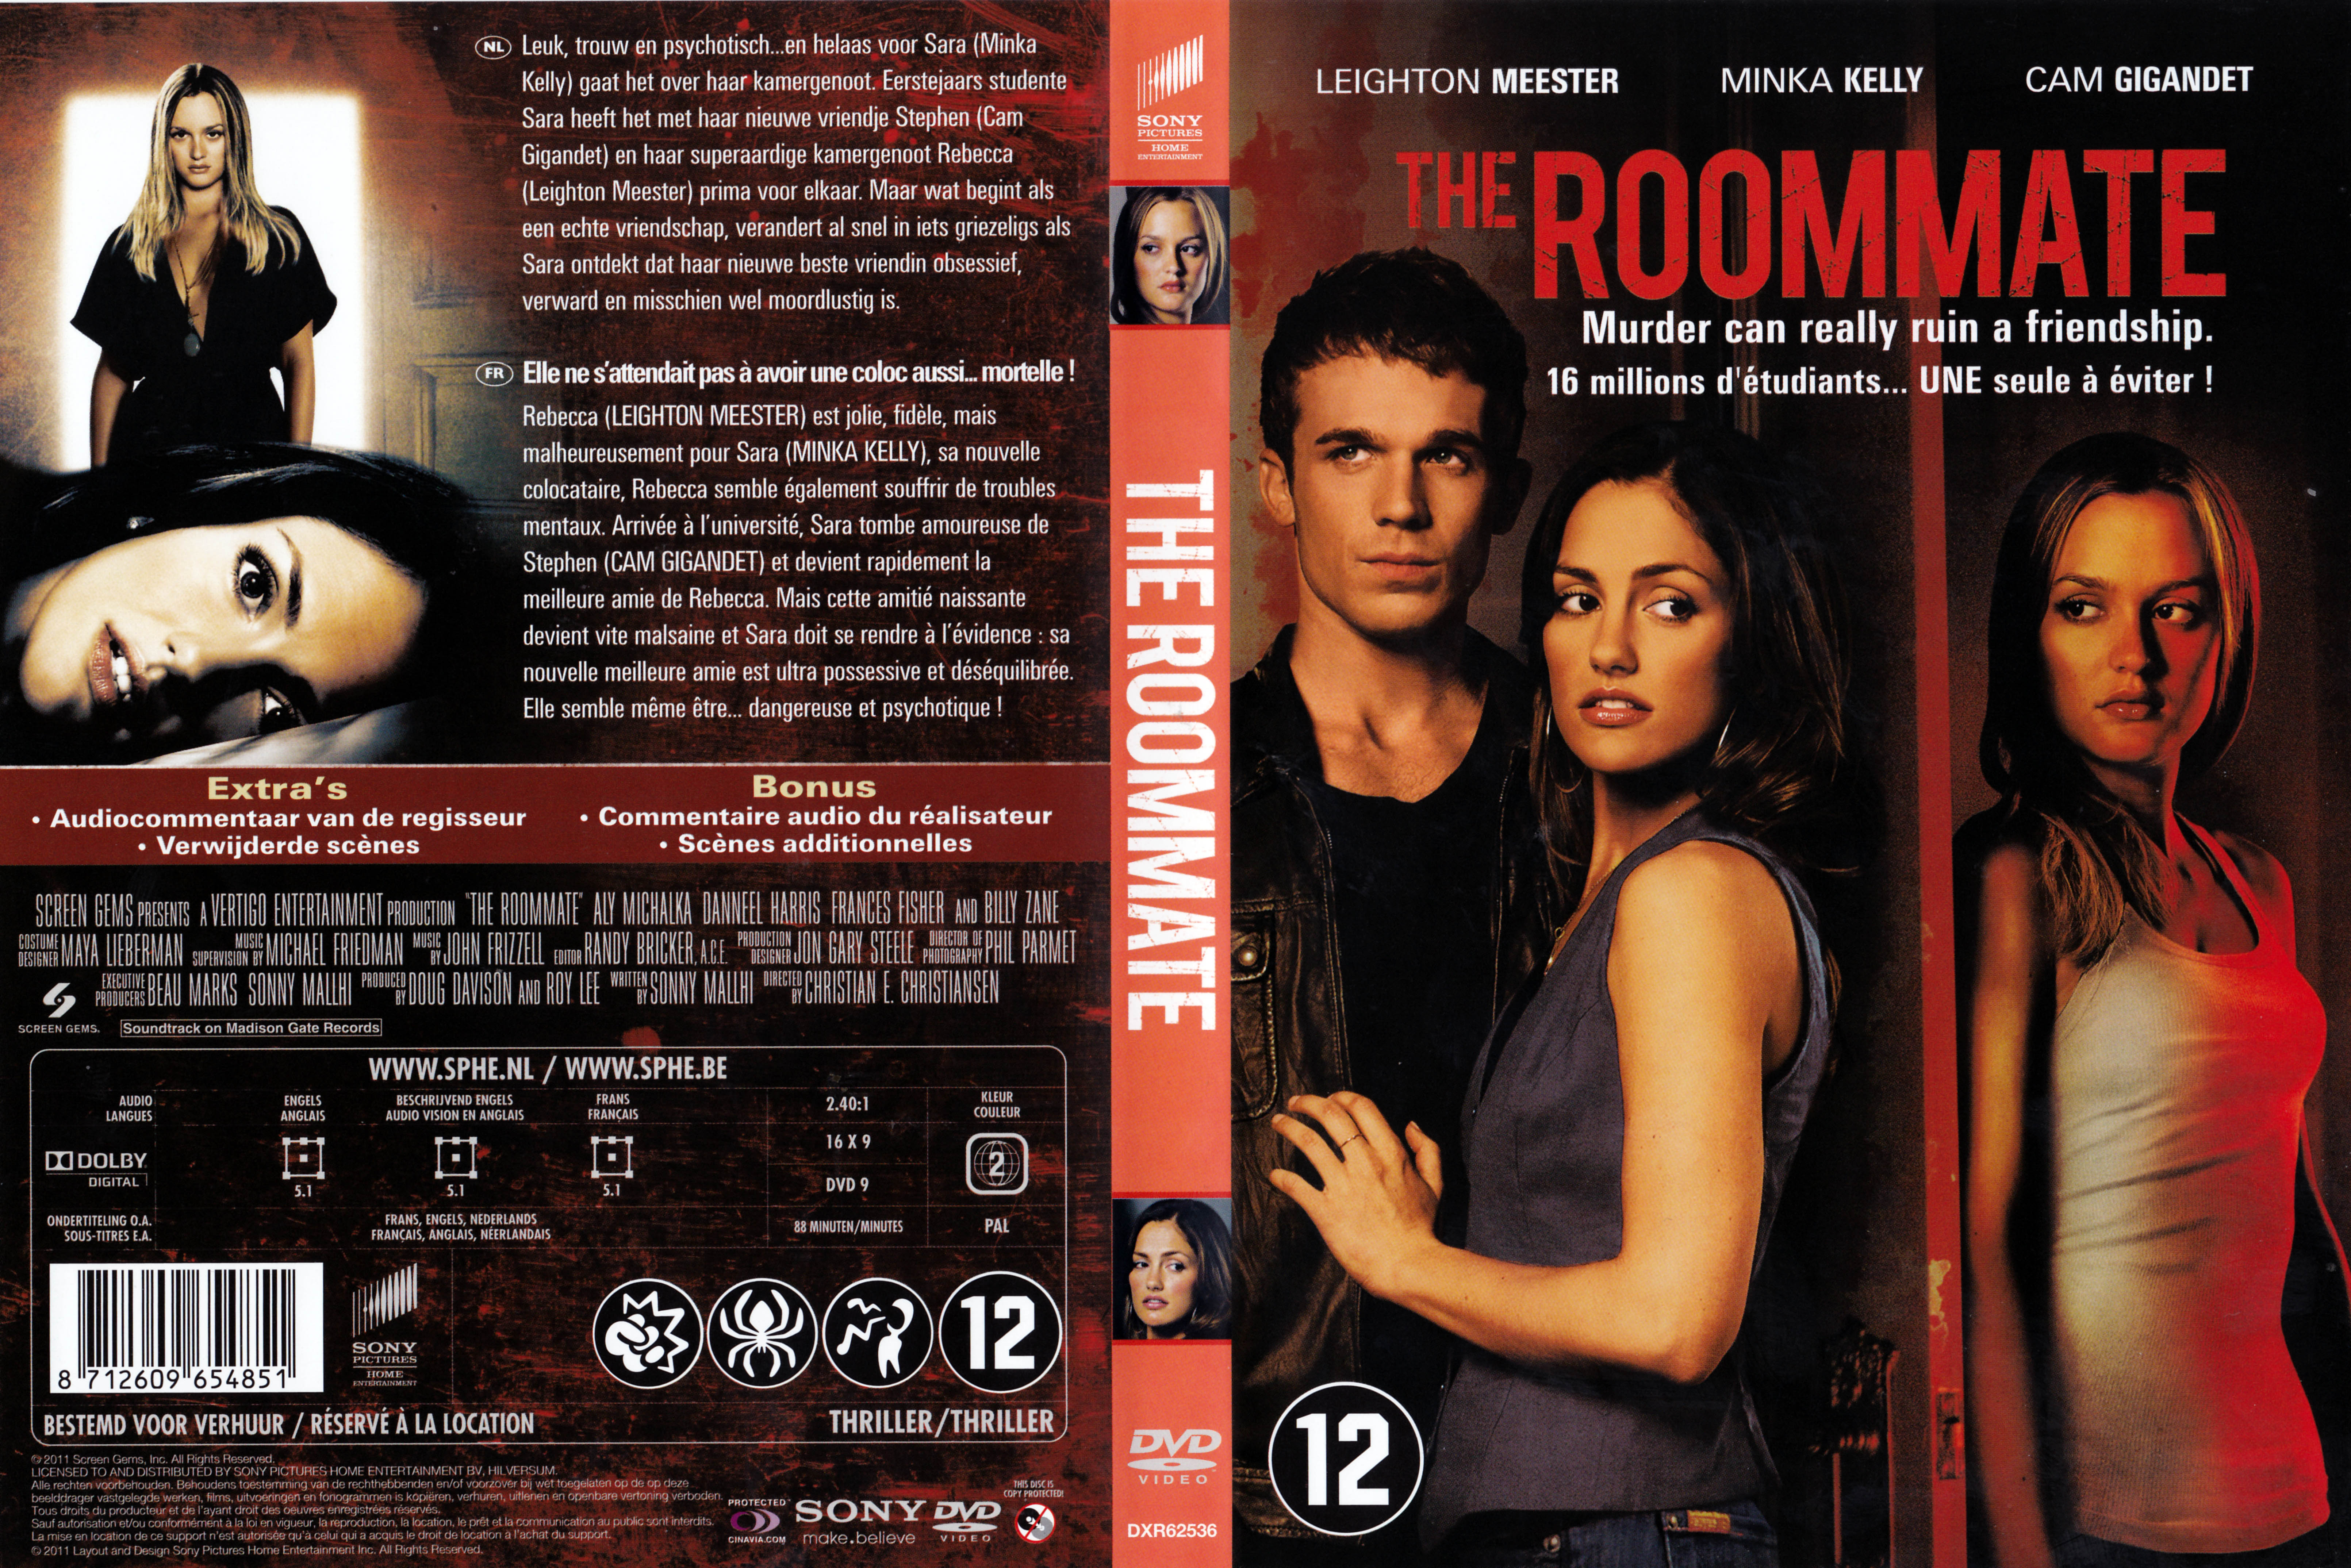 Jaquette DVD The roommate